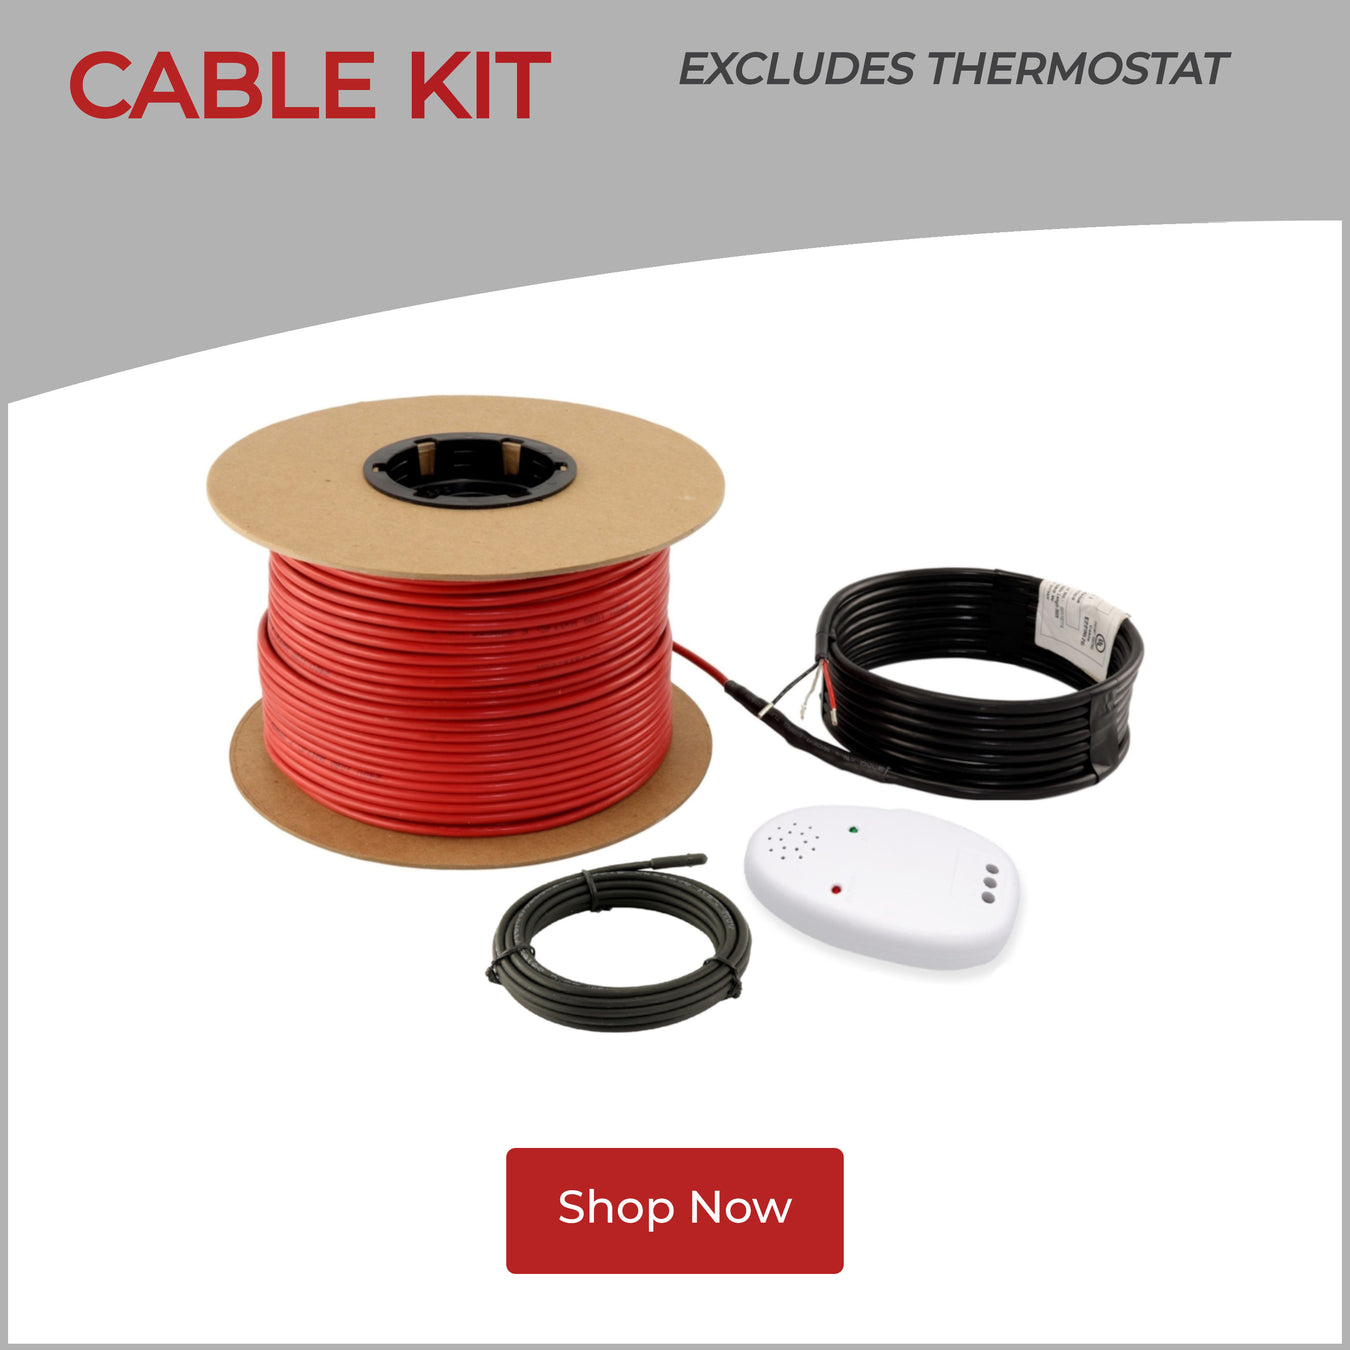 Overview_-_Cable_Kit_without_thermostat